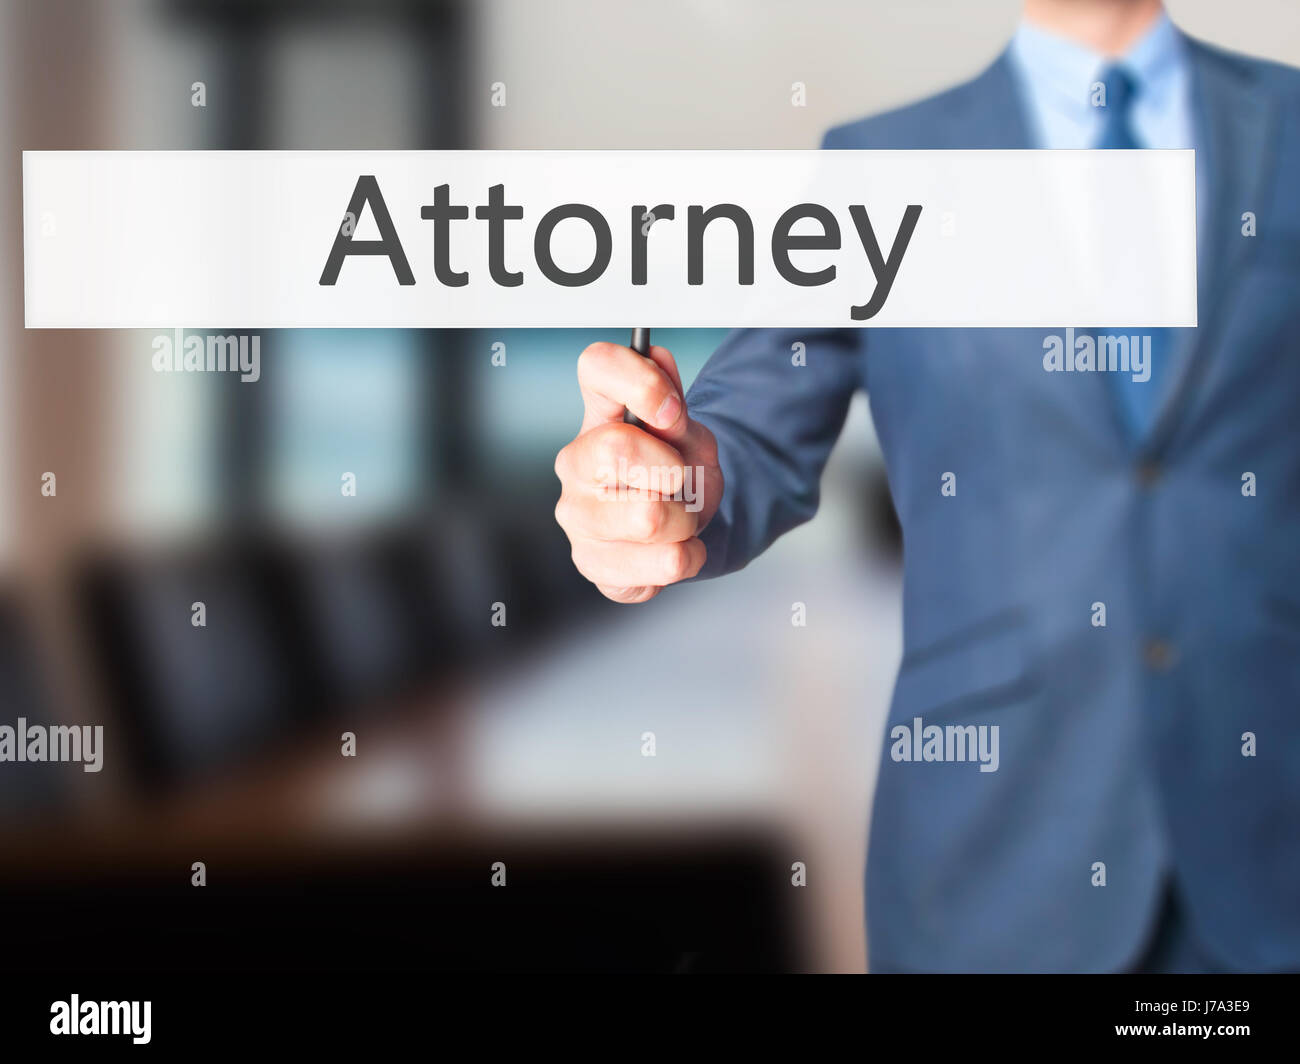 Attorney - Business man showing sign. Business, technology, internet concept. Stock Photo Stock Photo